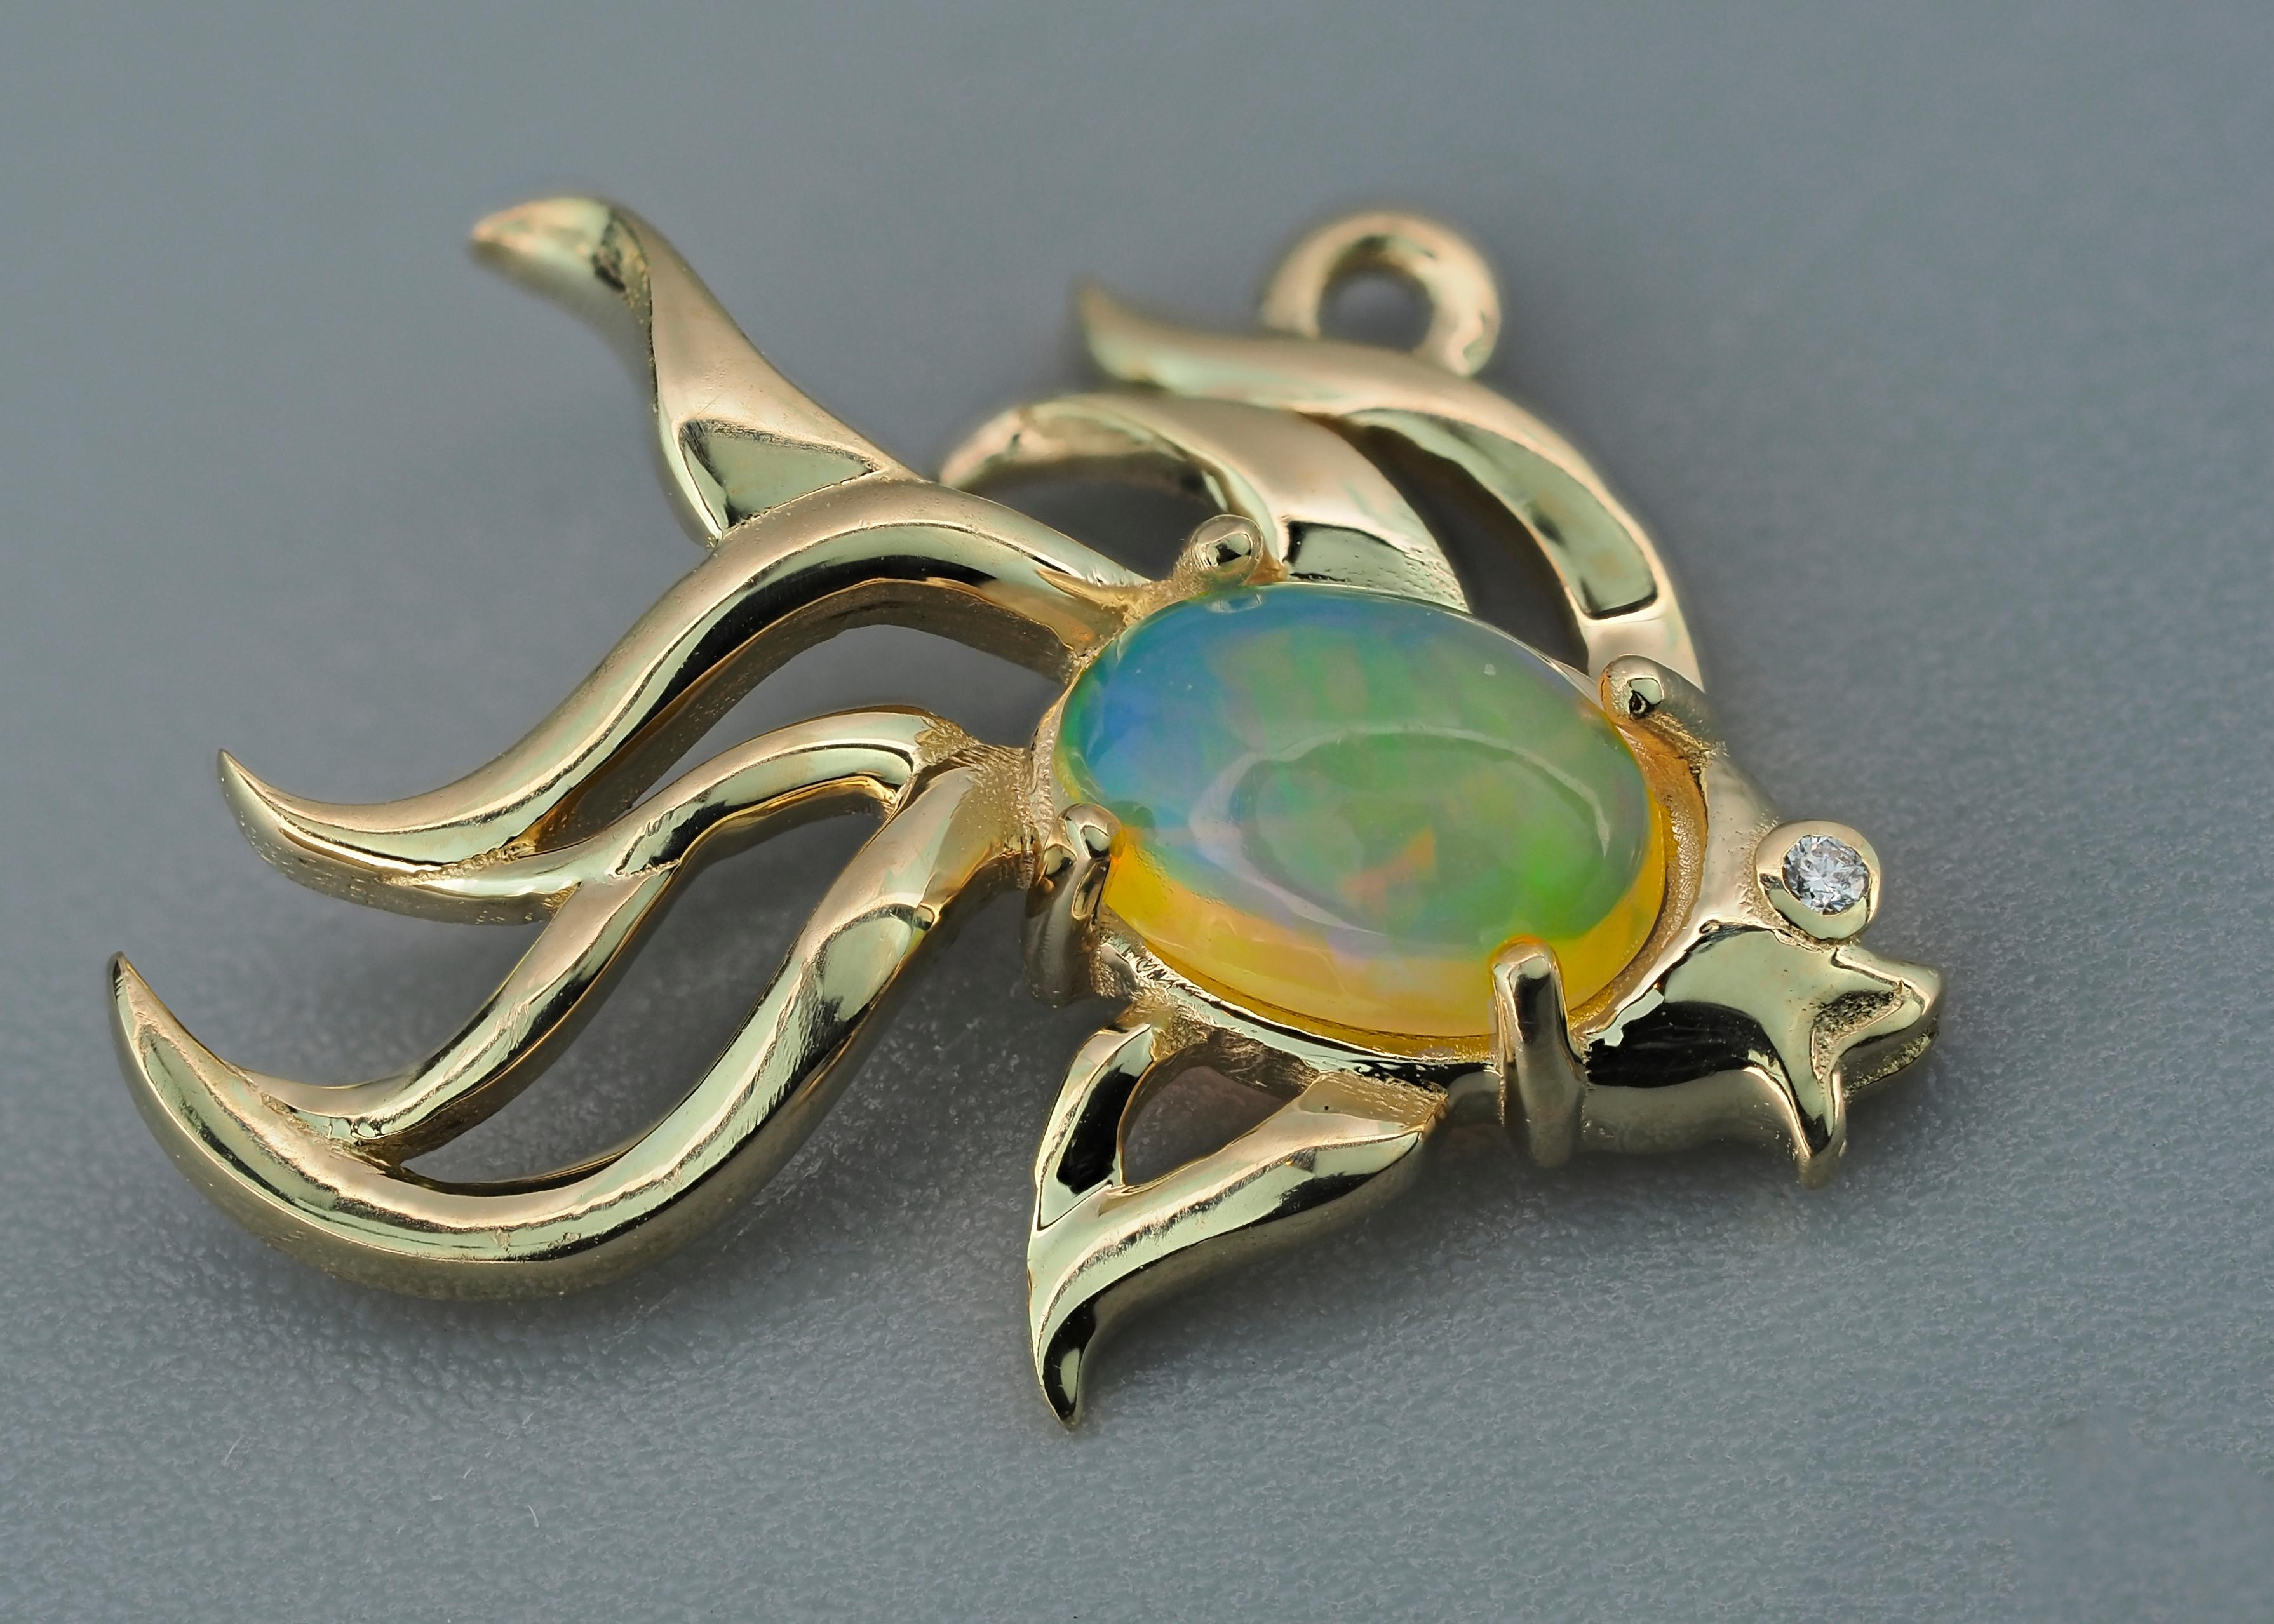 Fish Design 14k Gold Pendant with Opal and Diamond For Sale 3